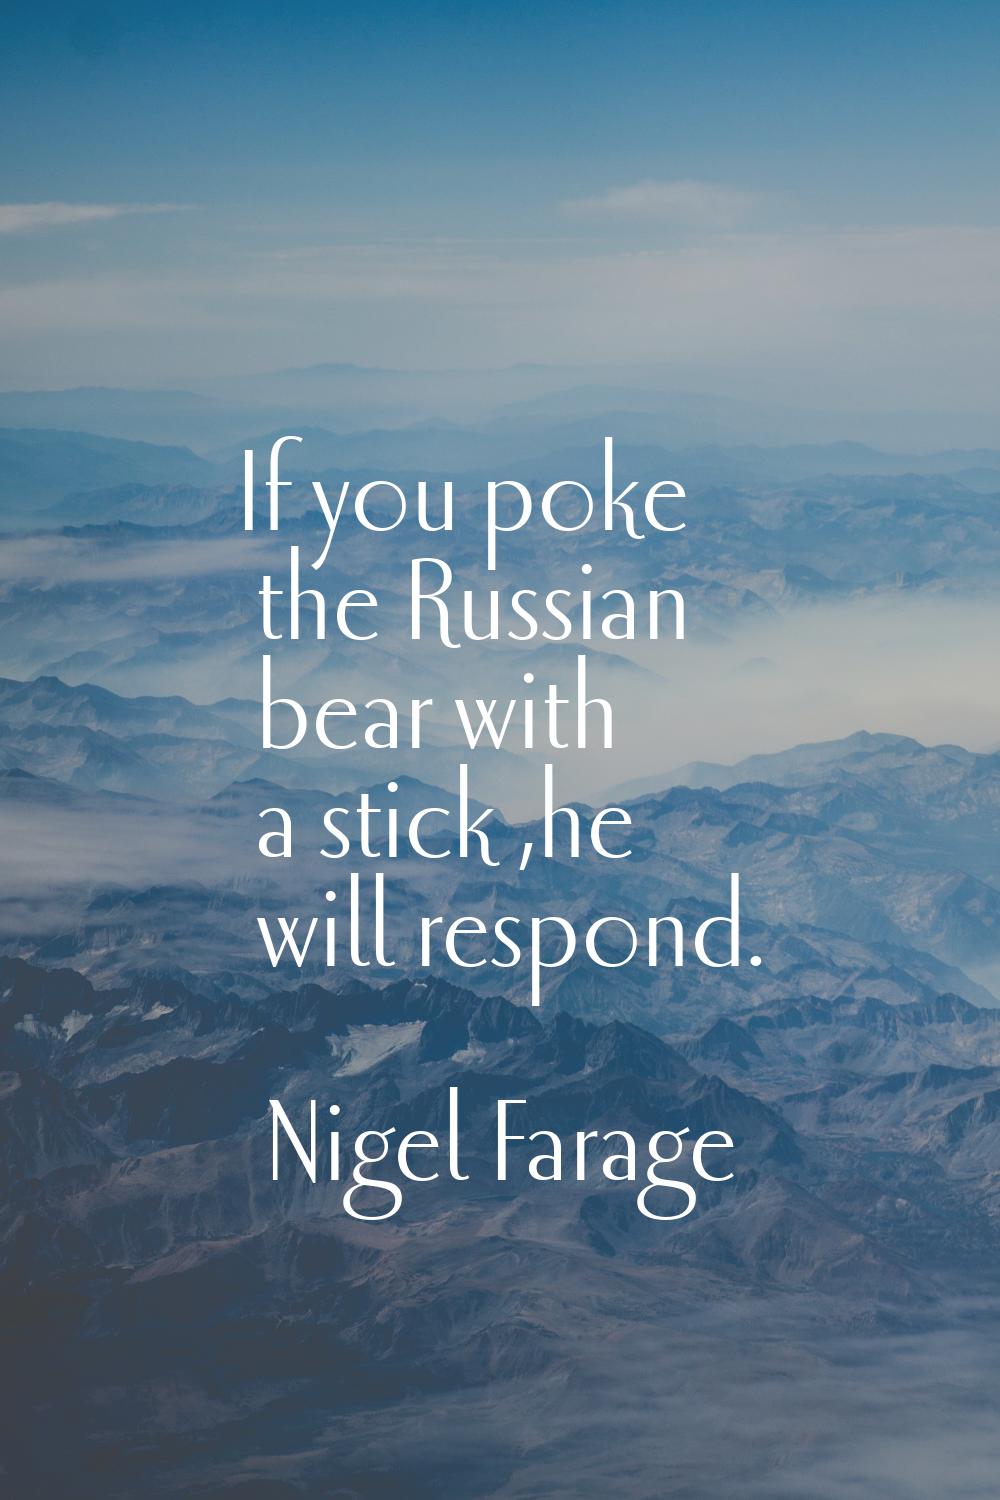 If you poke the Russian bear with a stick ,he will respond.